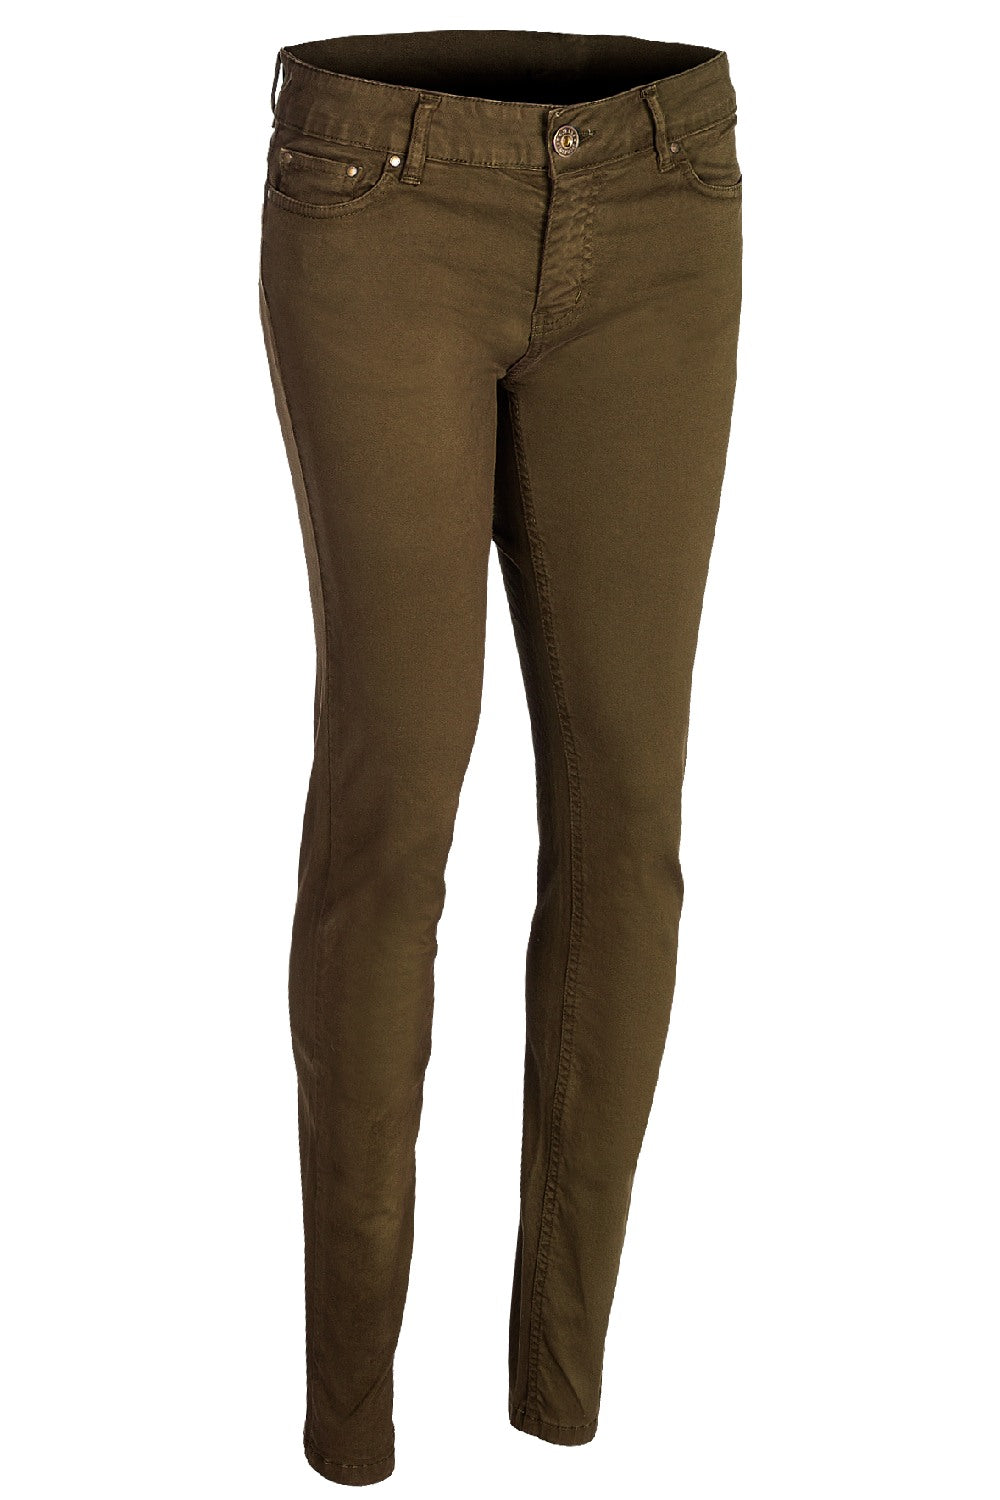 Baleno Womens Cotton Trousers in Pine Green 